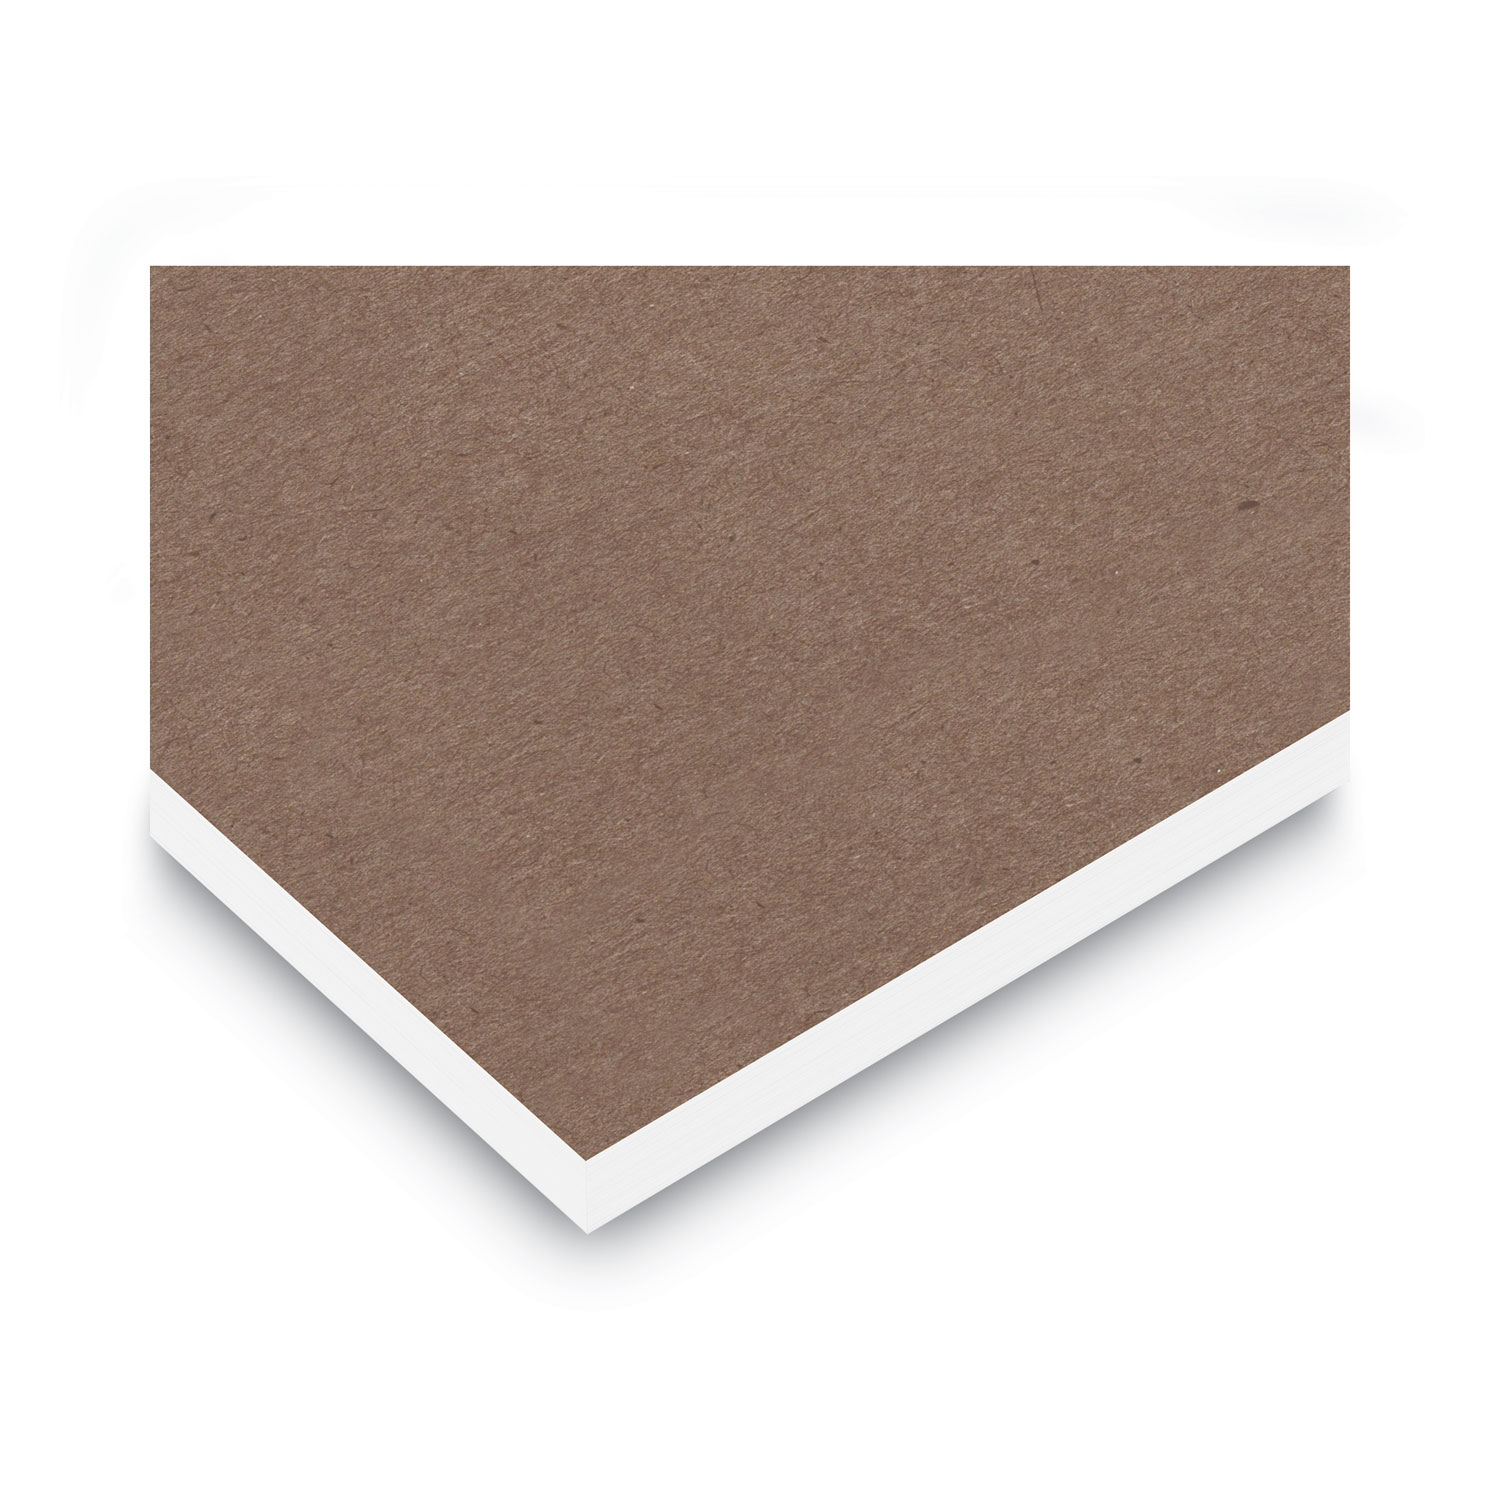 Printed Scratch Pads (50 Sheets, 5.375 x 8.375), Office Supplies